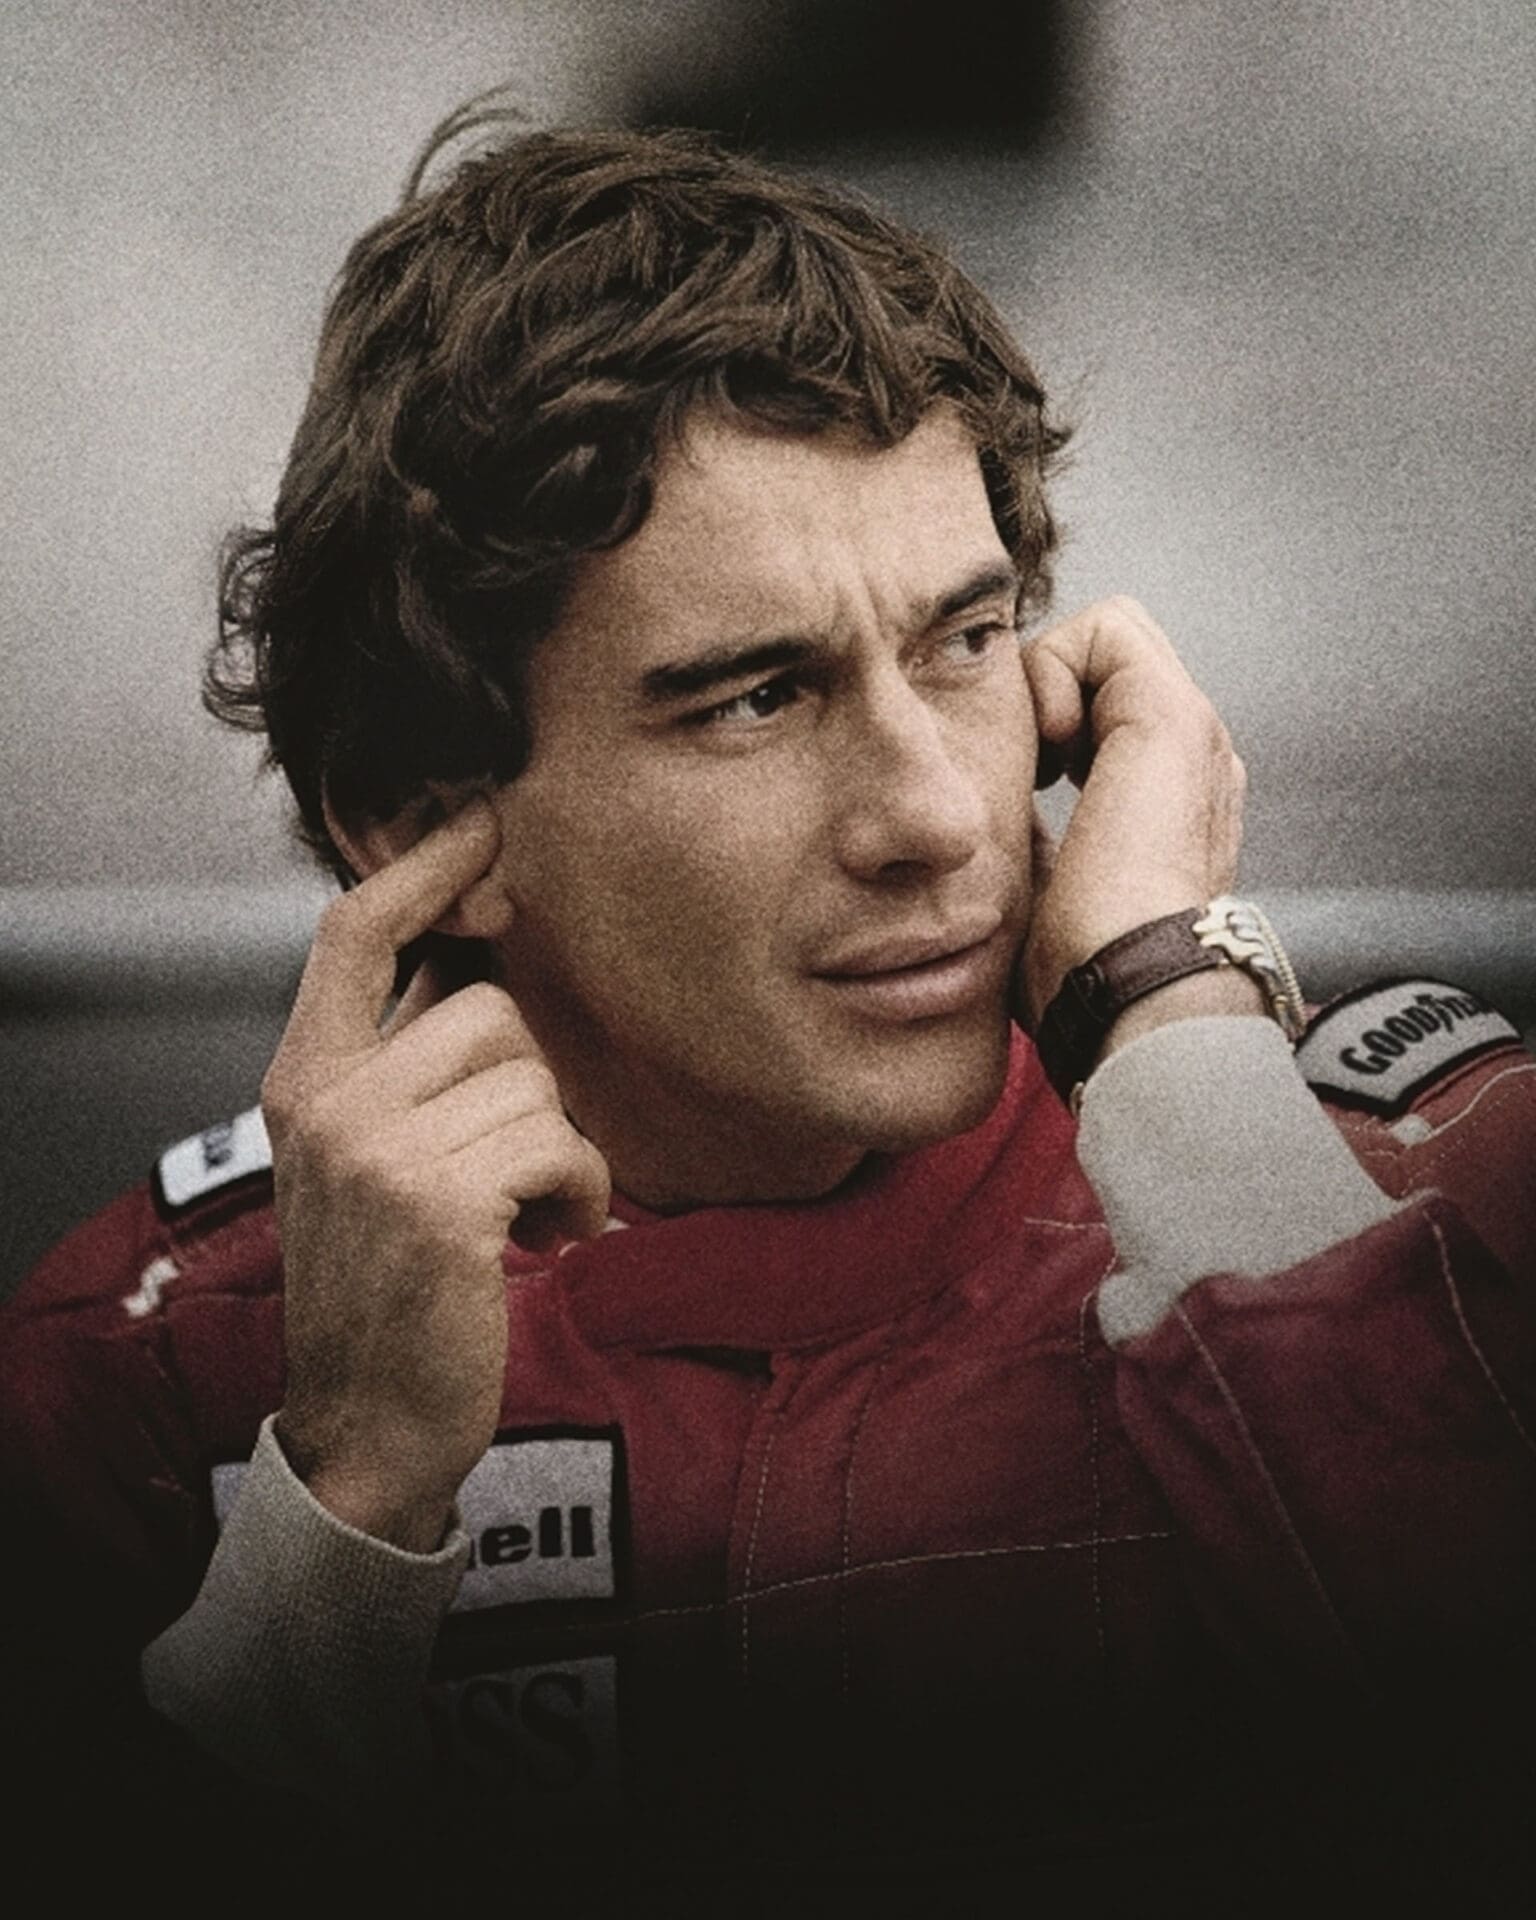 vintage watches in Formula 1